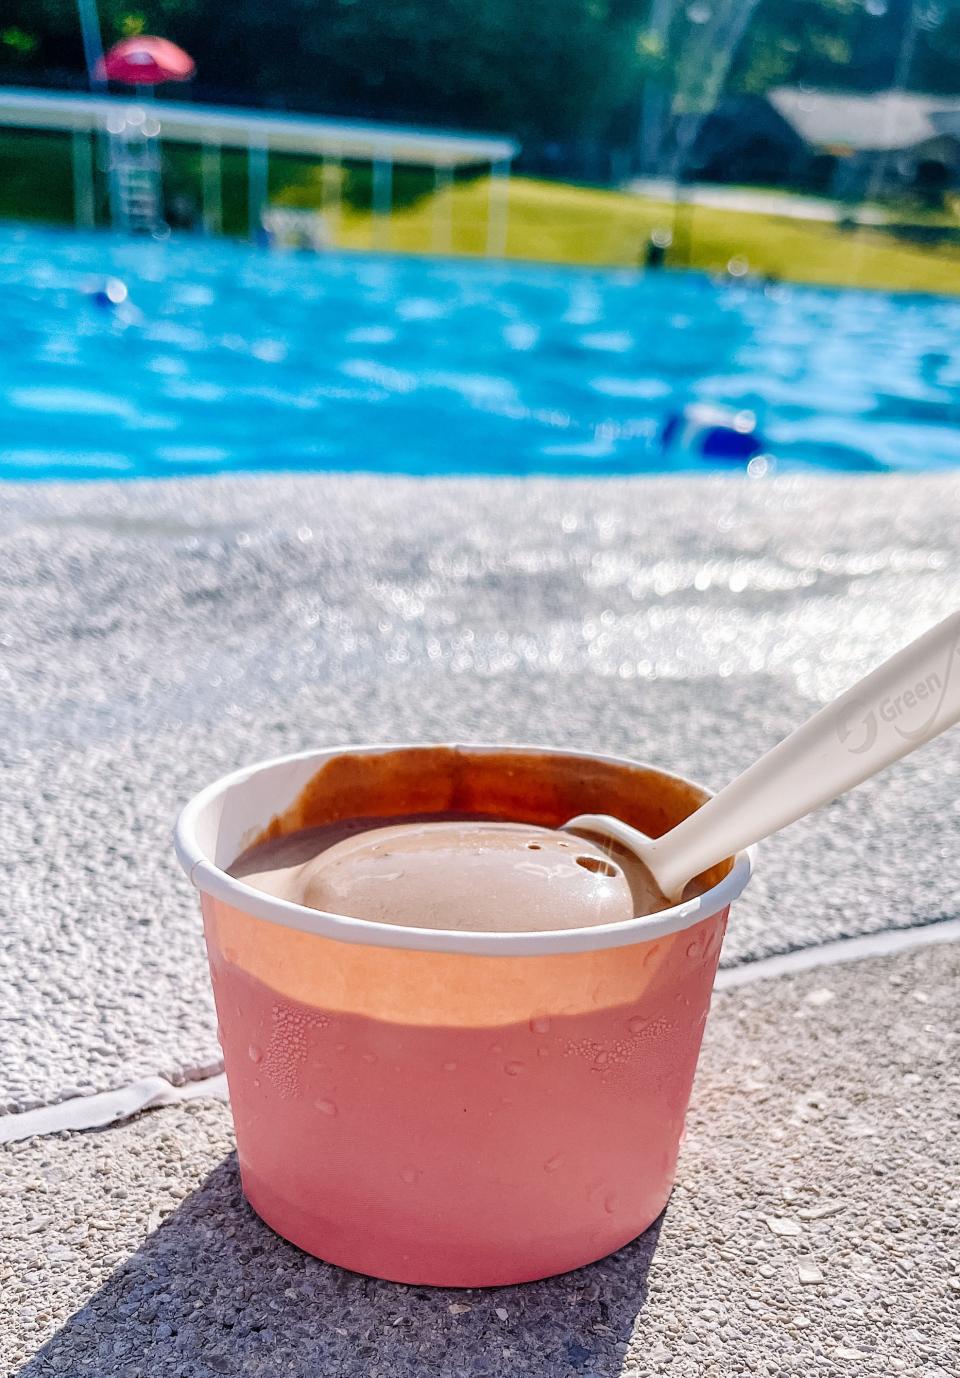 Milk + Honey Ice Cream launched in time for this summer. Chocolate orange flavor ice cream is pictured poolside on May 31, 2022.